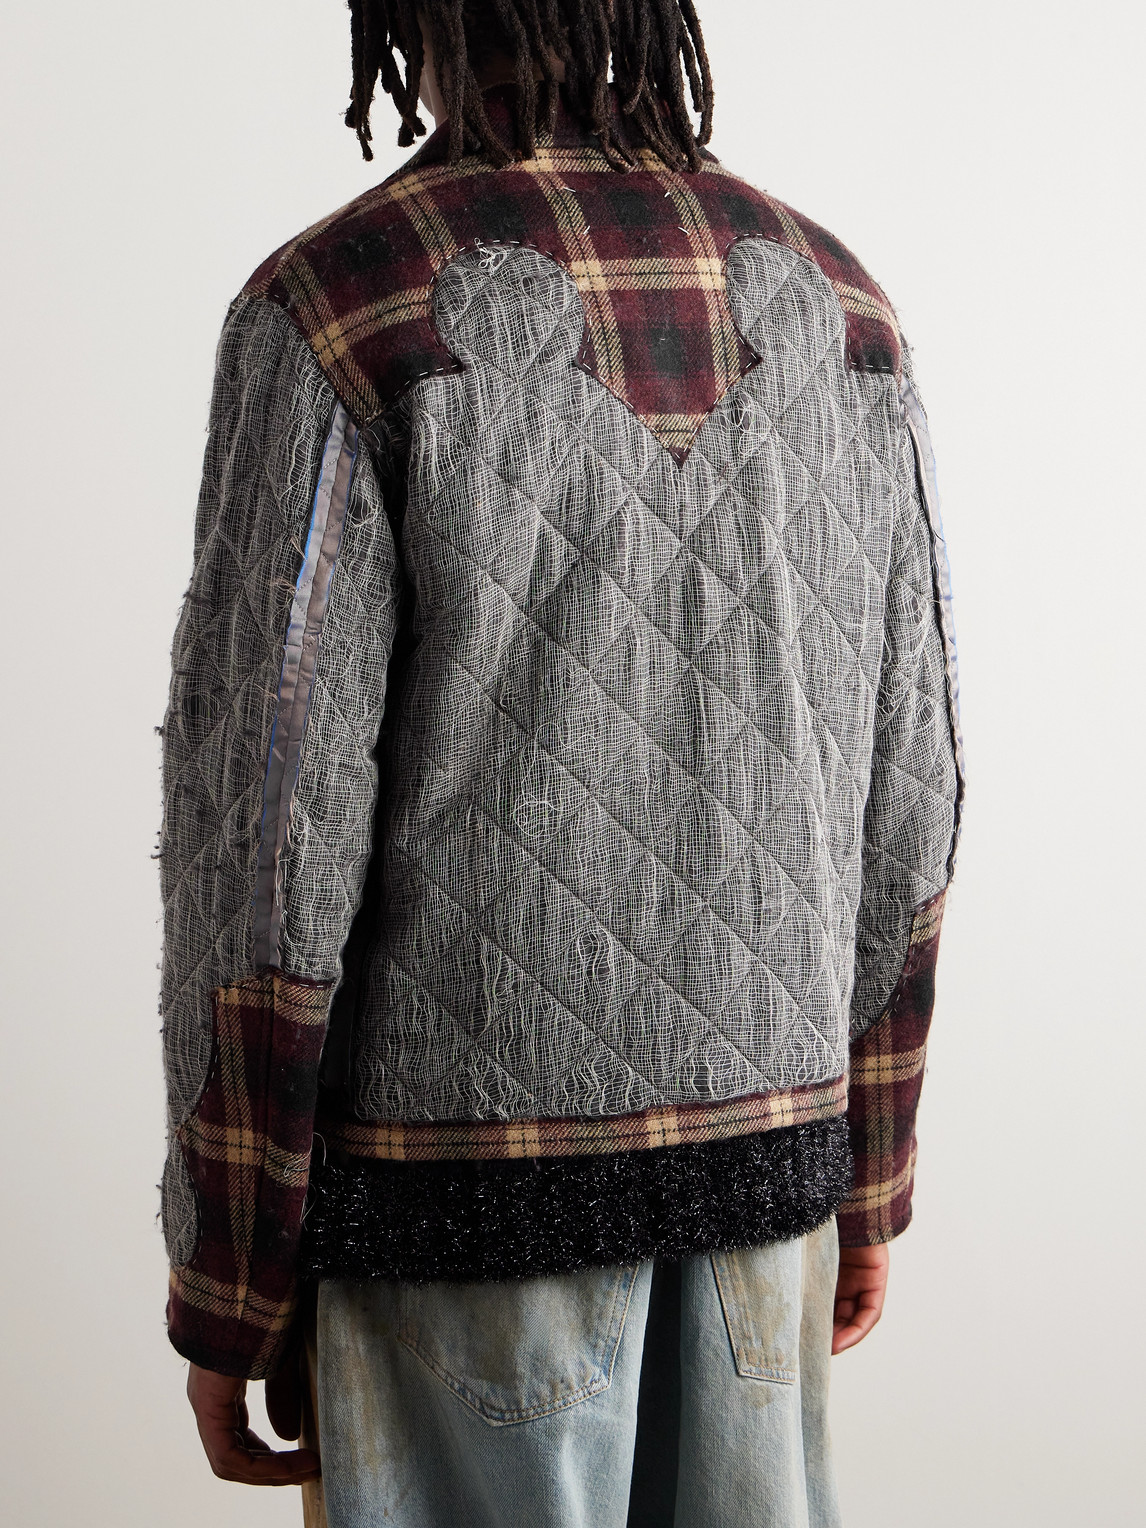 Shop Maison Margiela Pendleton Embroidered Patchwork Checked Wool And Cotton Bomber Jacket In Burgundy